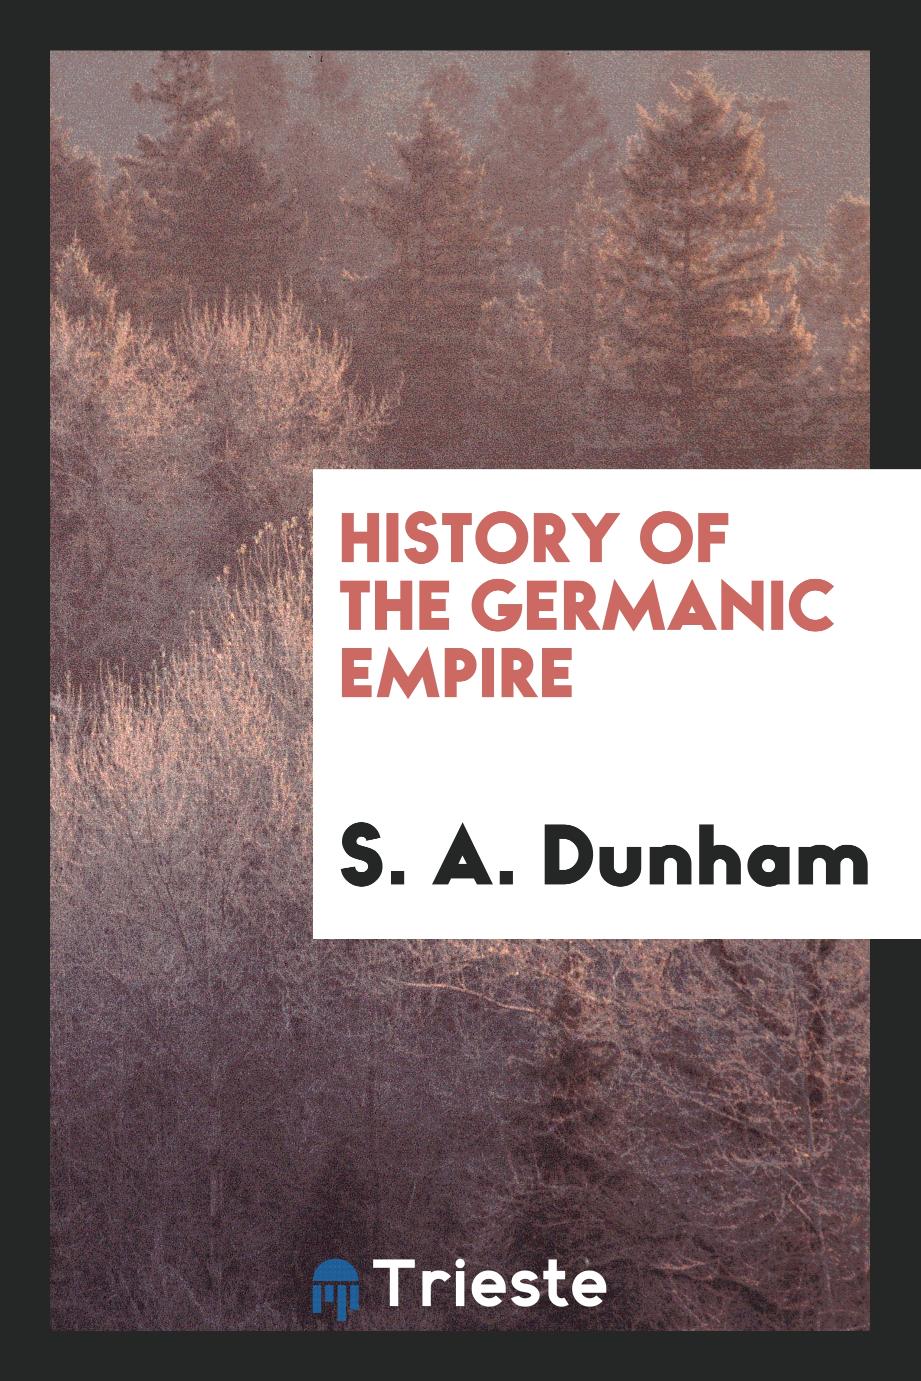 History of the Germanic Empire